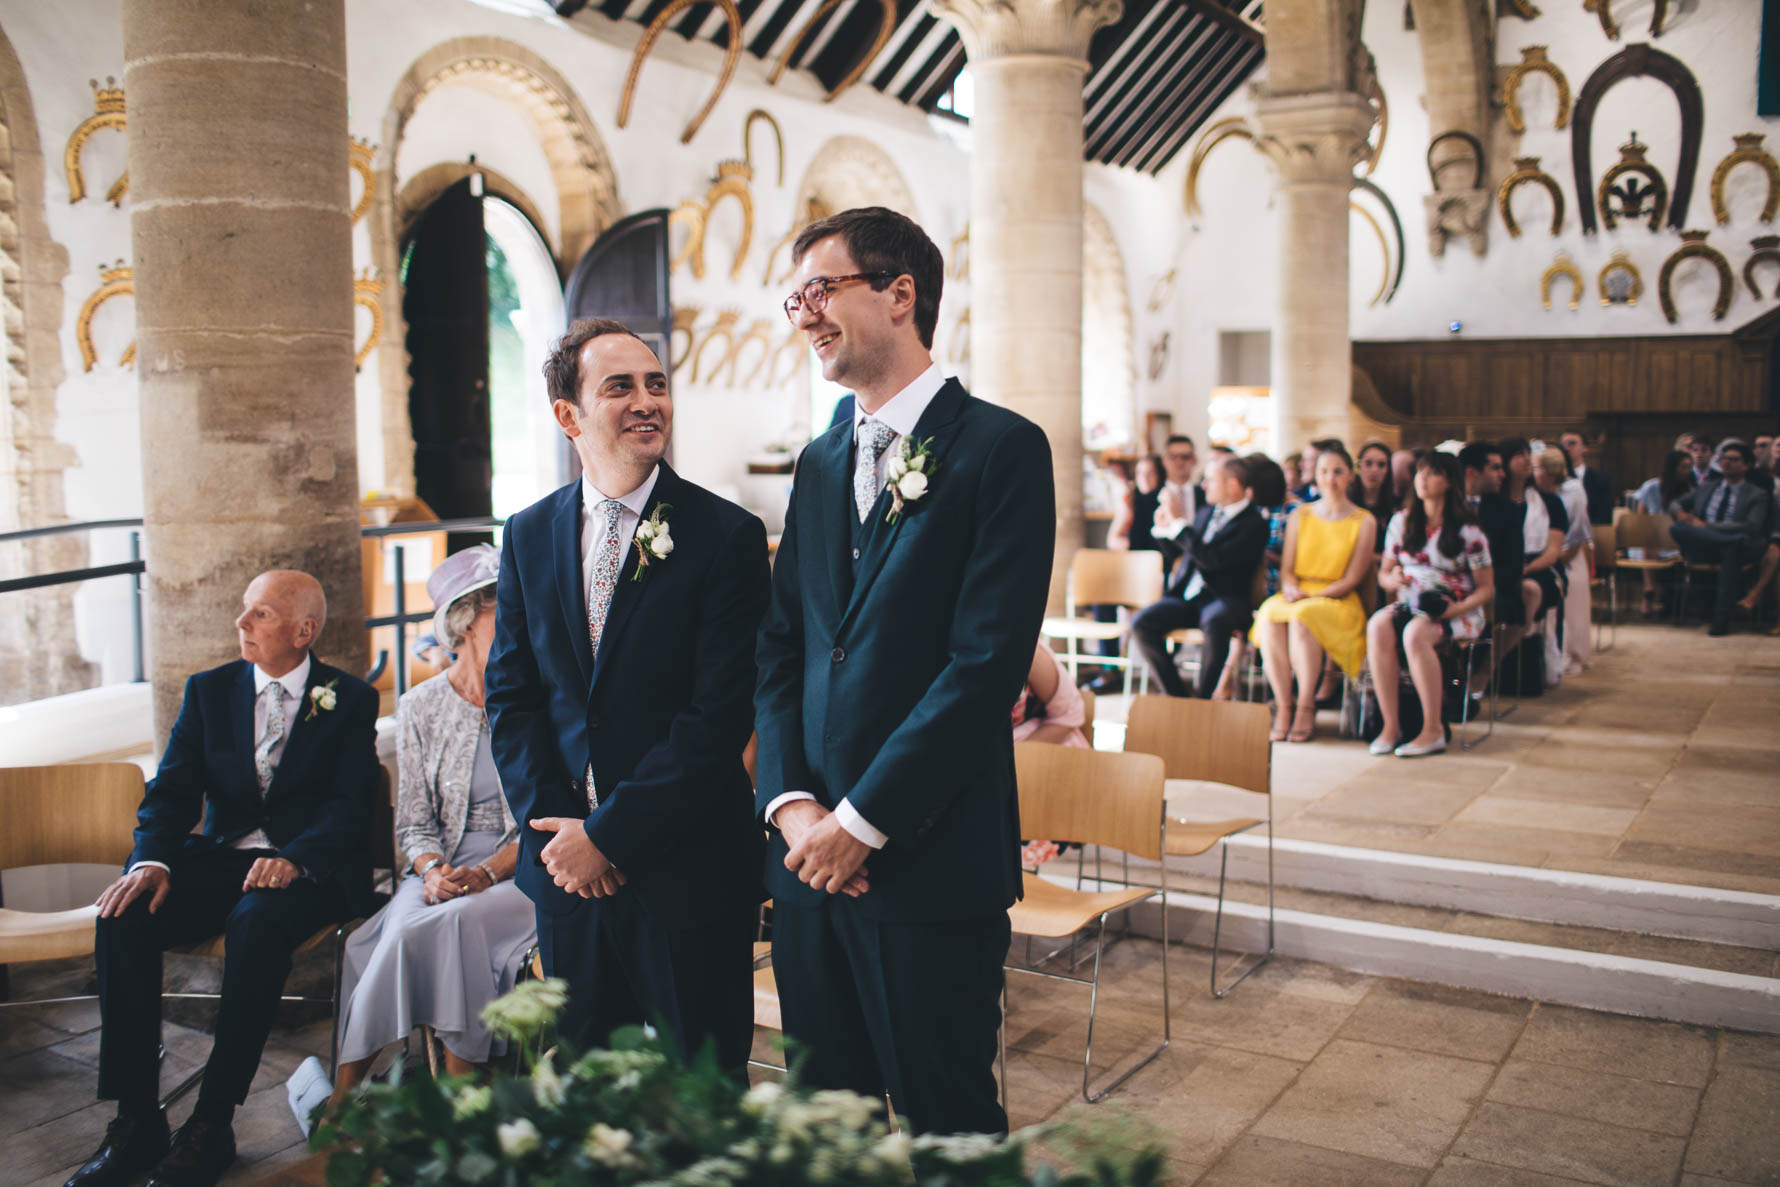 Groom and his best man waiting at the front of the Great Hall at Oakham Castle. There are ornamental horse shoes covering the walls